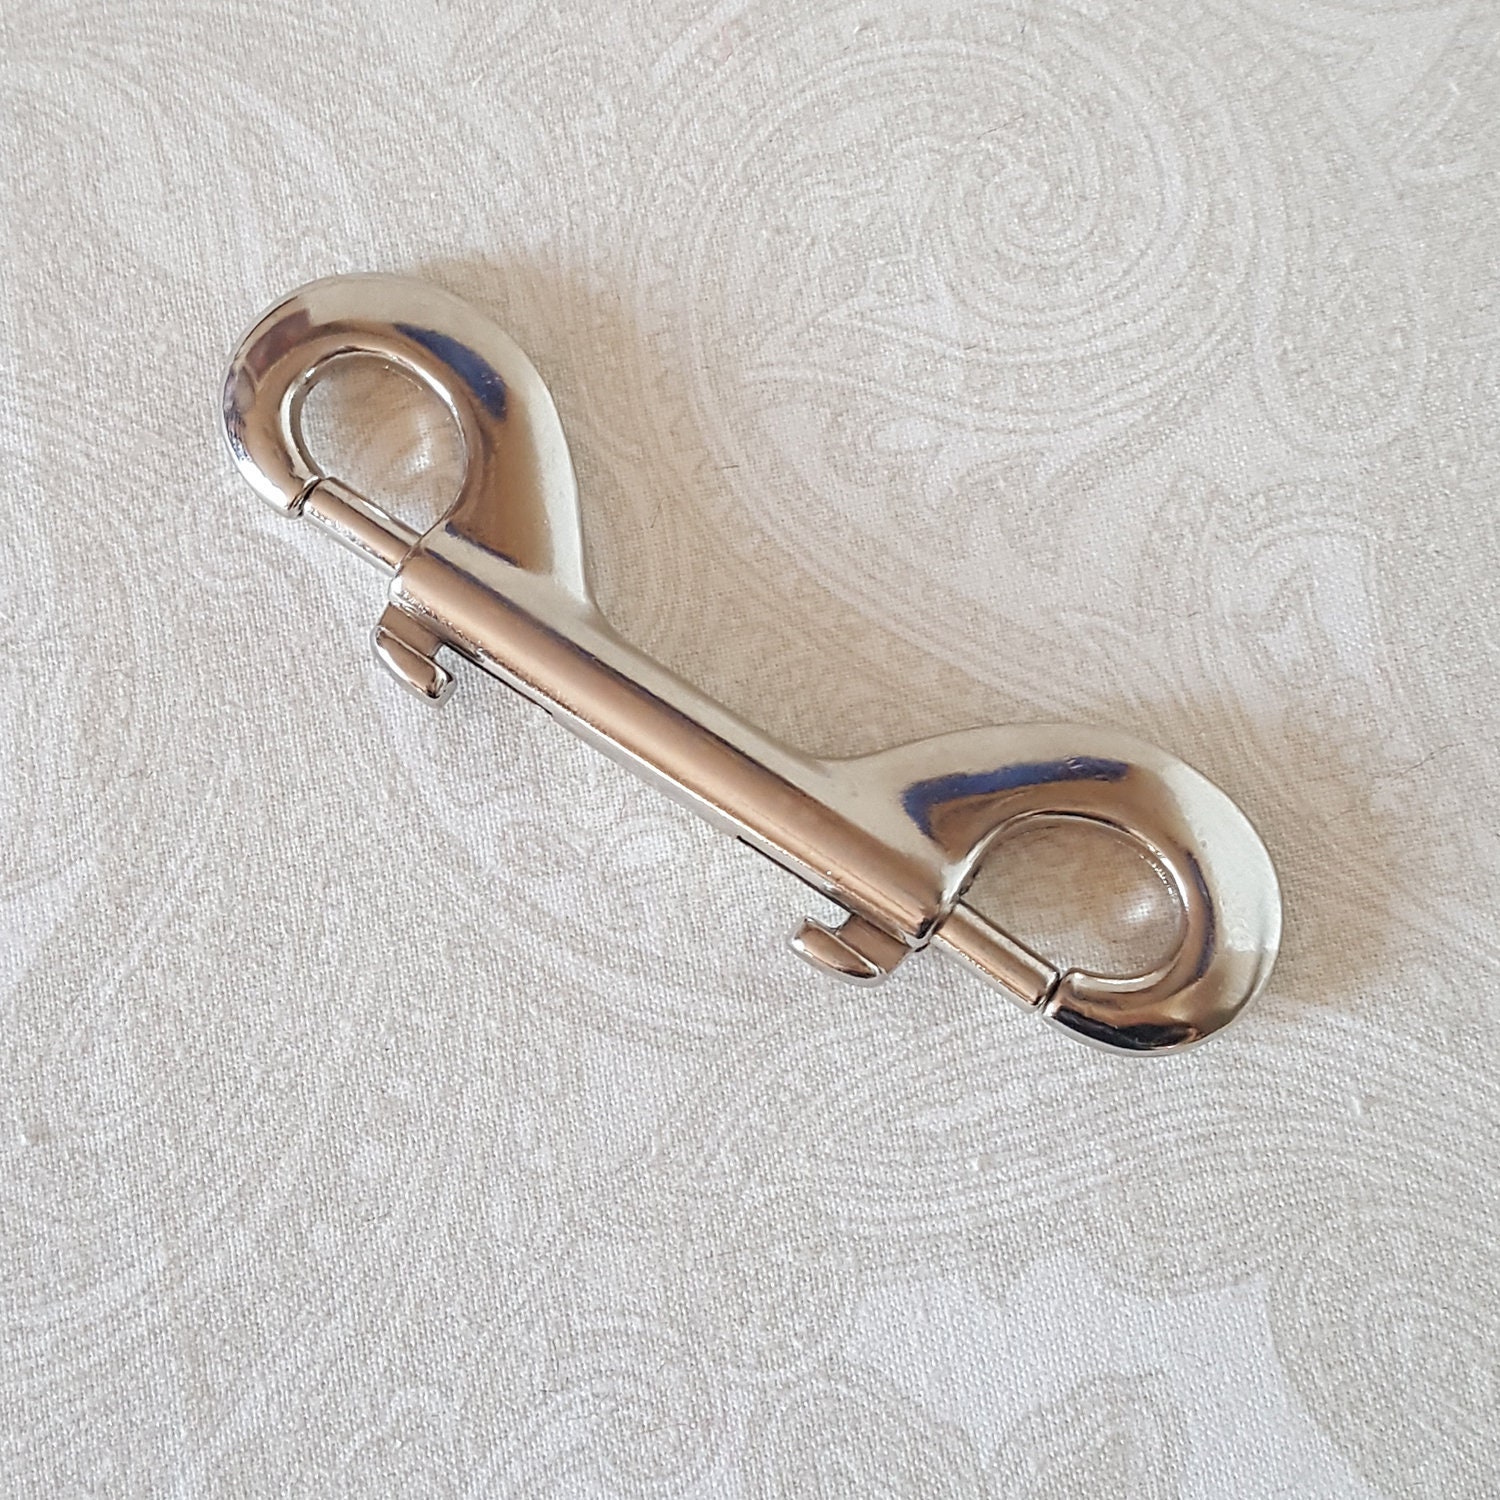 ADD-ON: Double Ended Snap Hook Cuff Connector BDSM Bondage